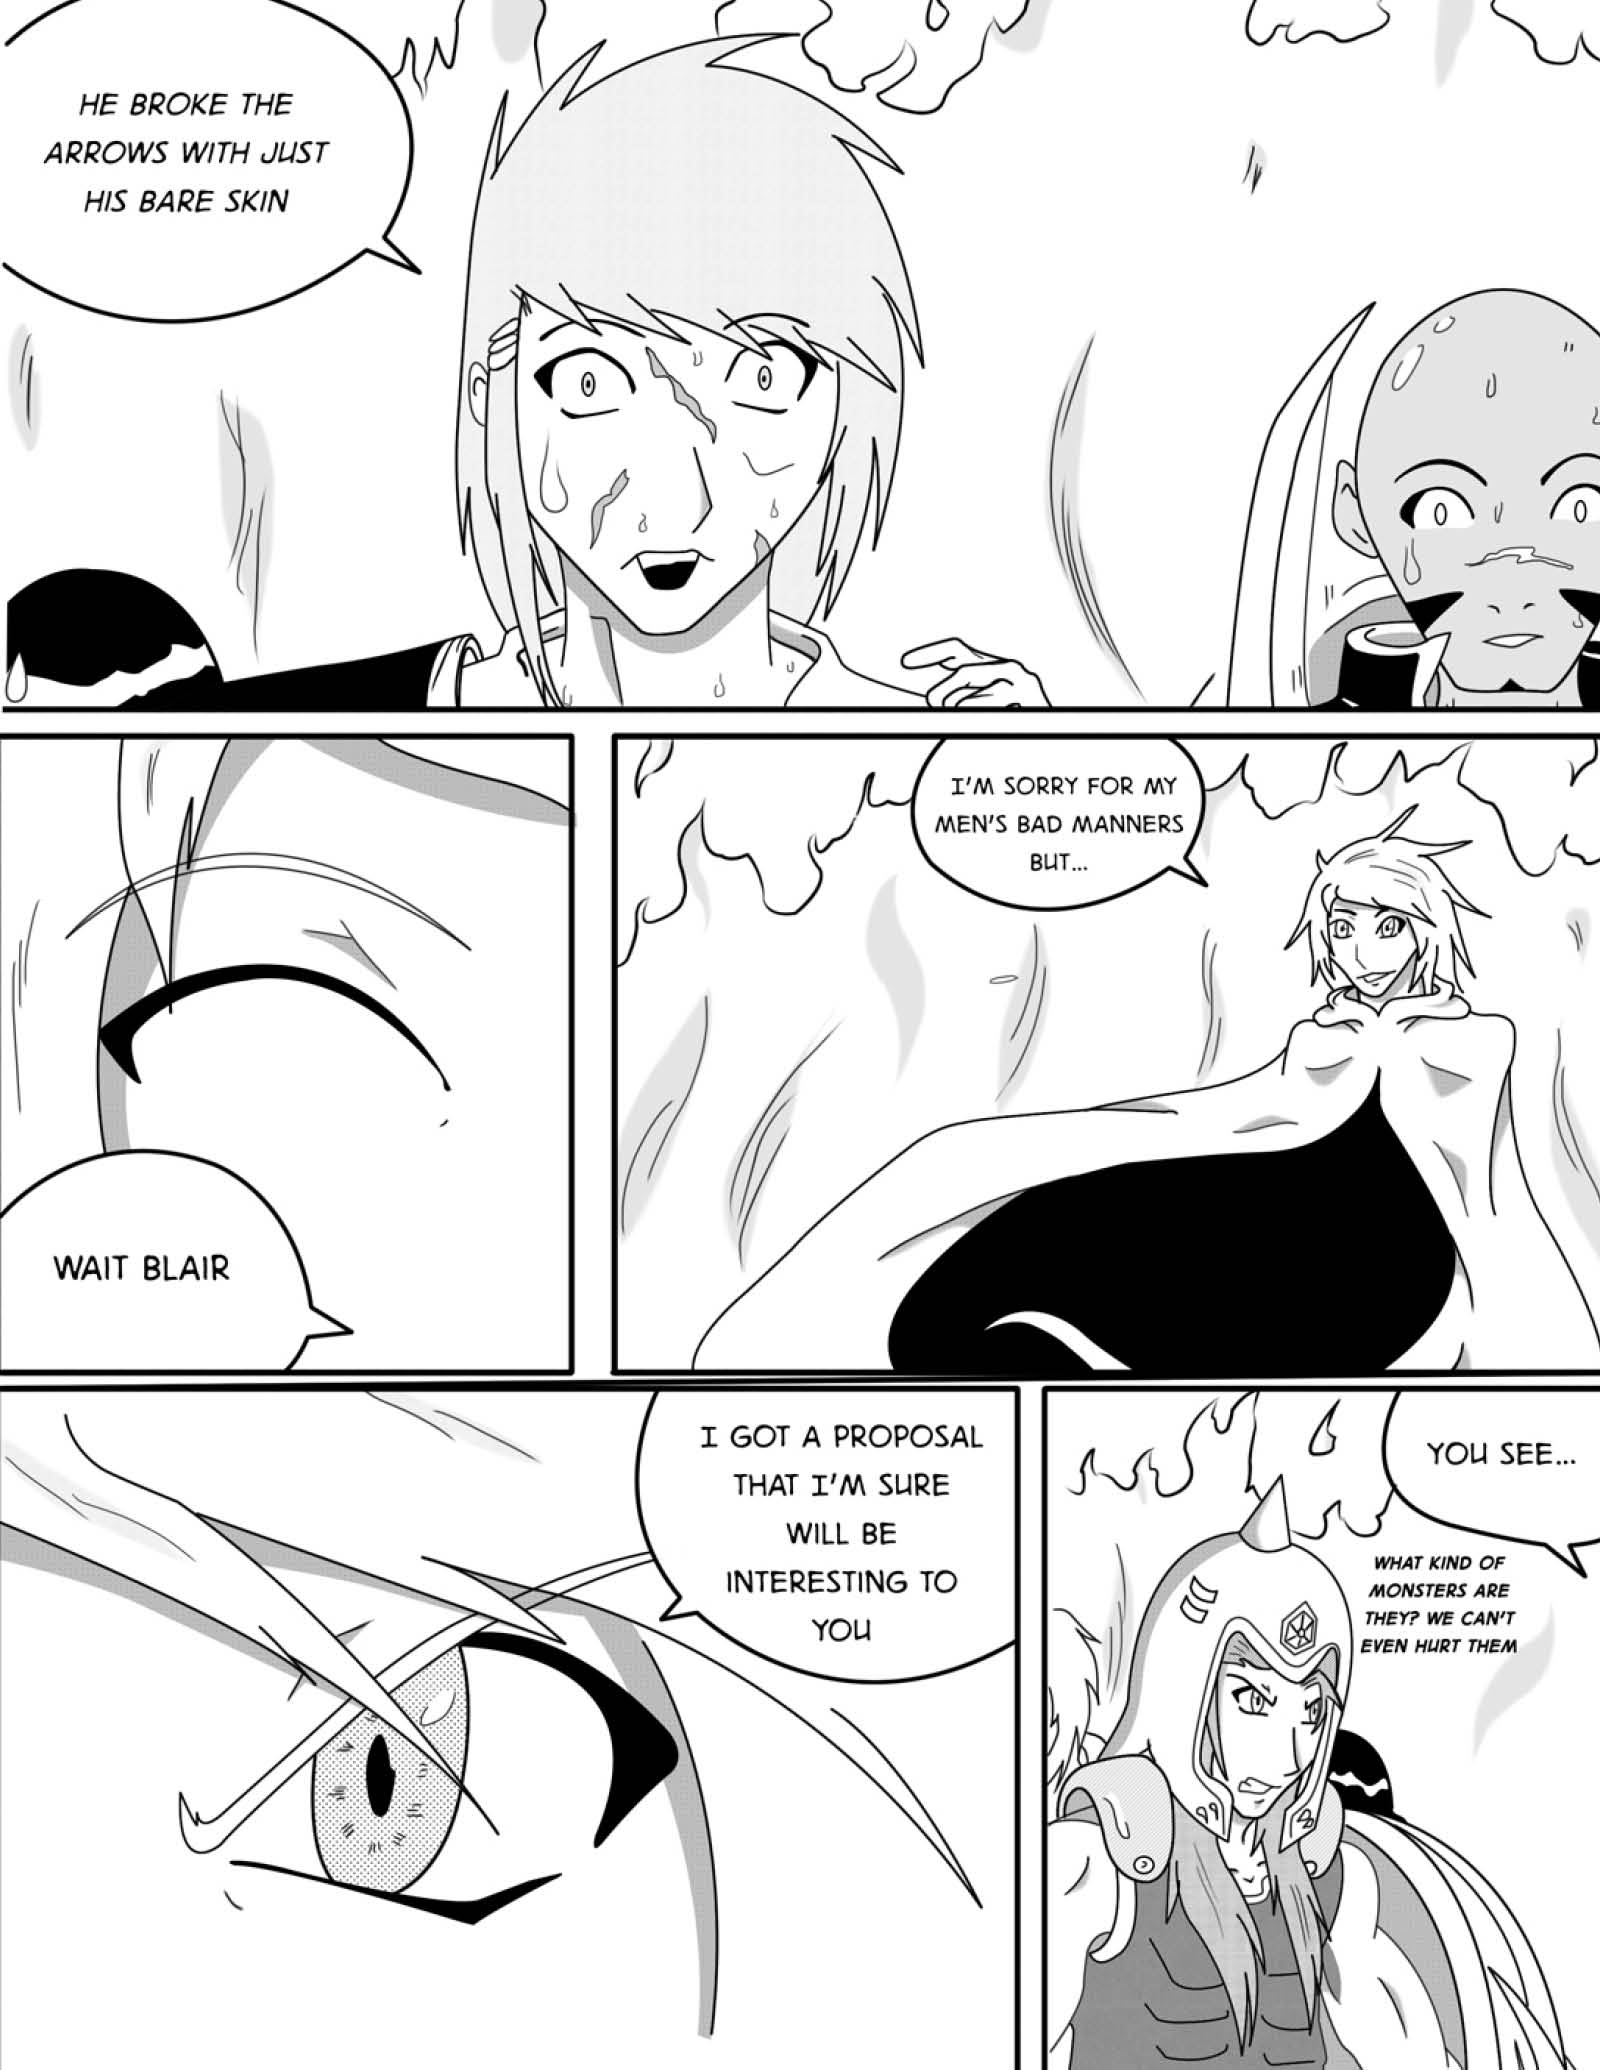 Series Dilan: the Chronicles of Covak - Chapter 2 - Page 5 - Language ENG